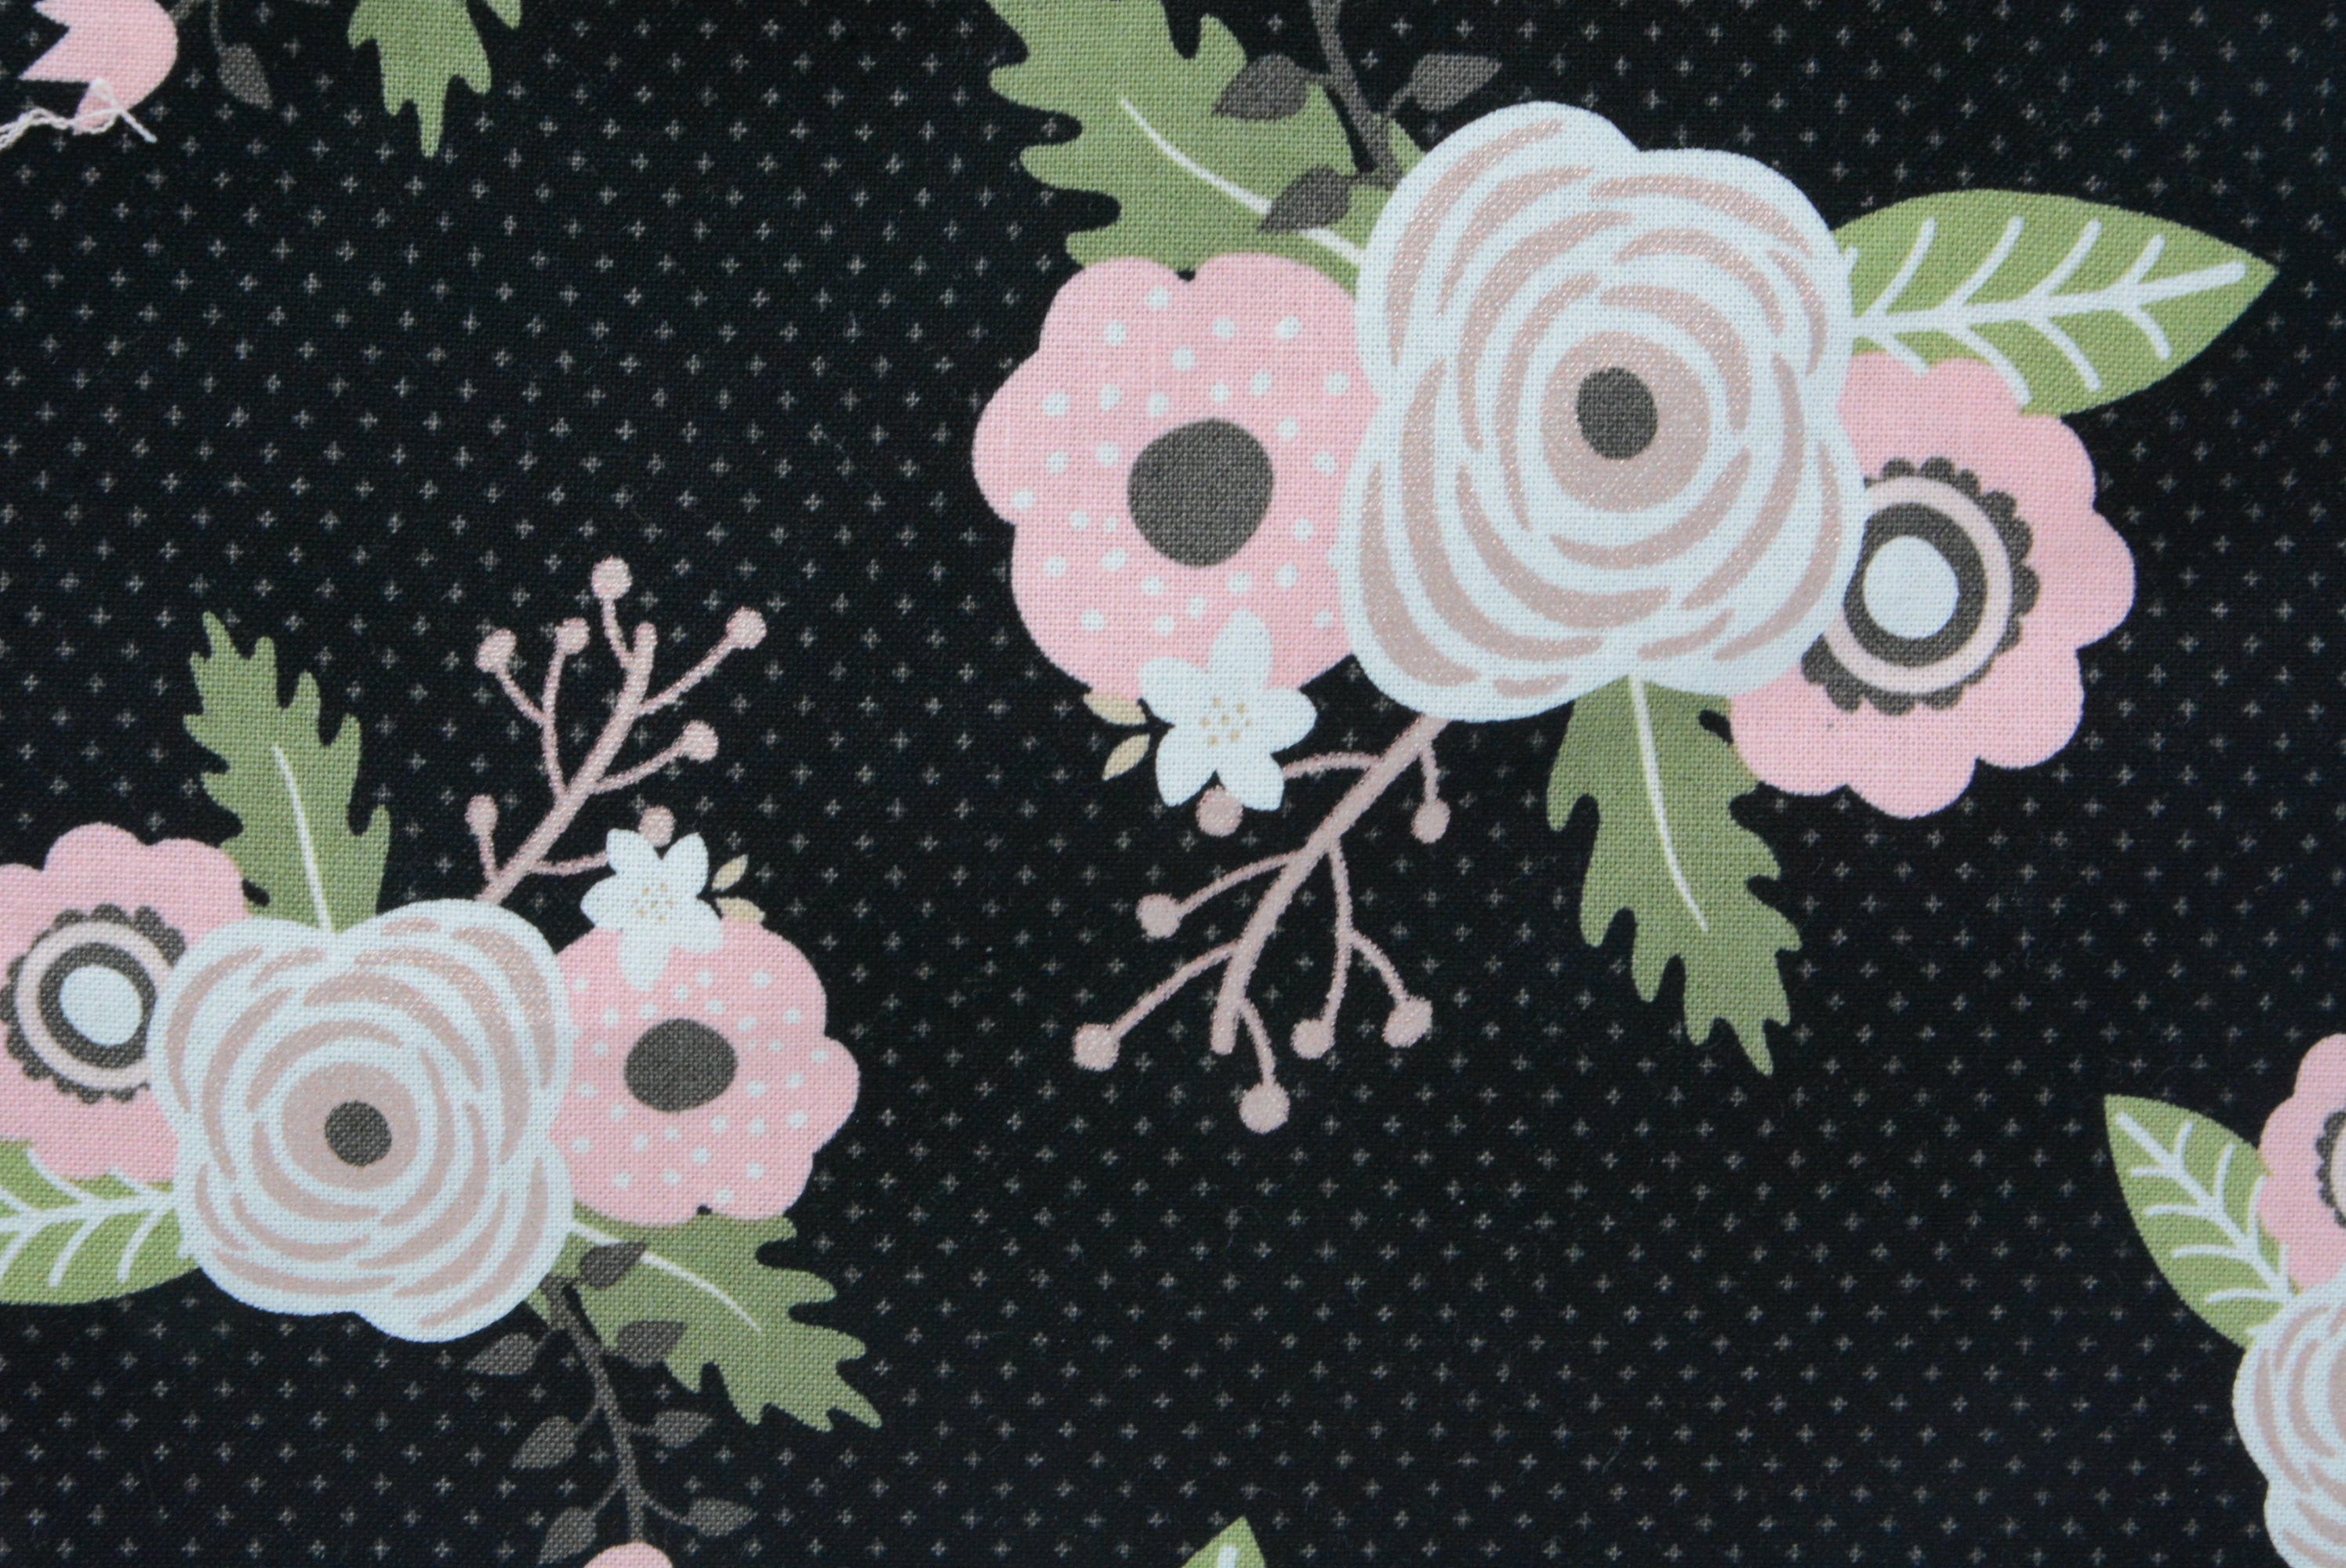 Roses on Black with Polka Dots - Rose Gold Metallic Print